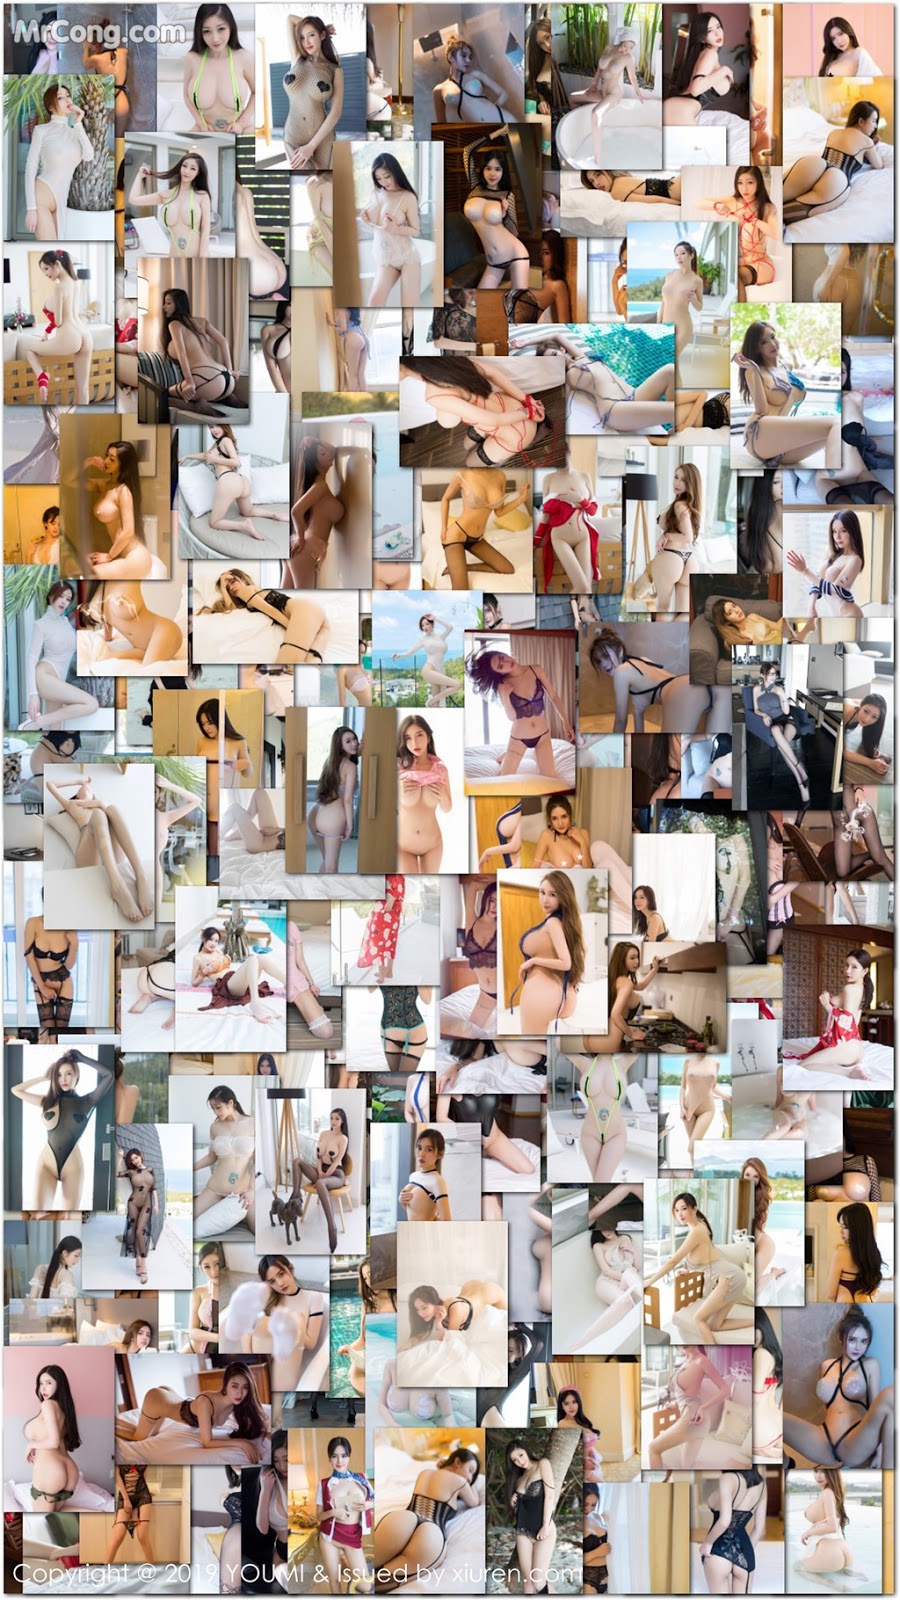 YouMi Vol. 195: Various Models (91 pictures)